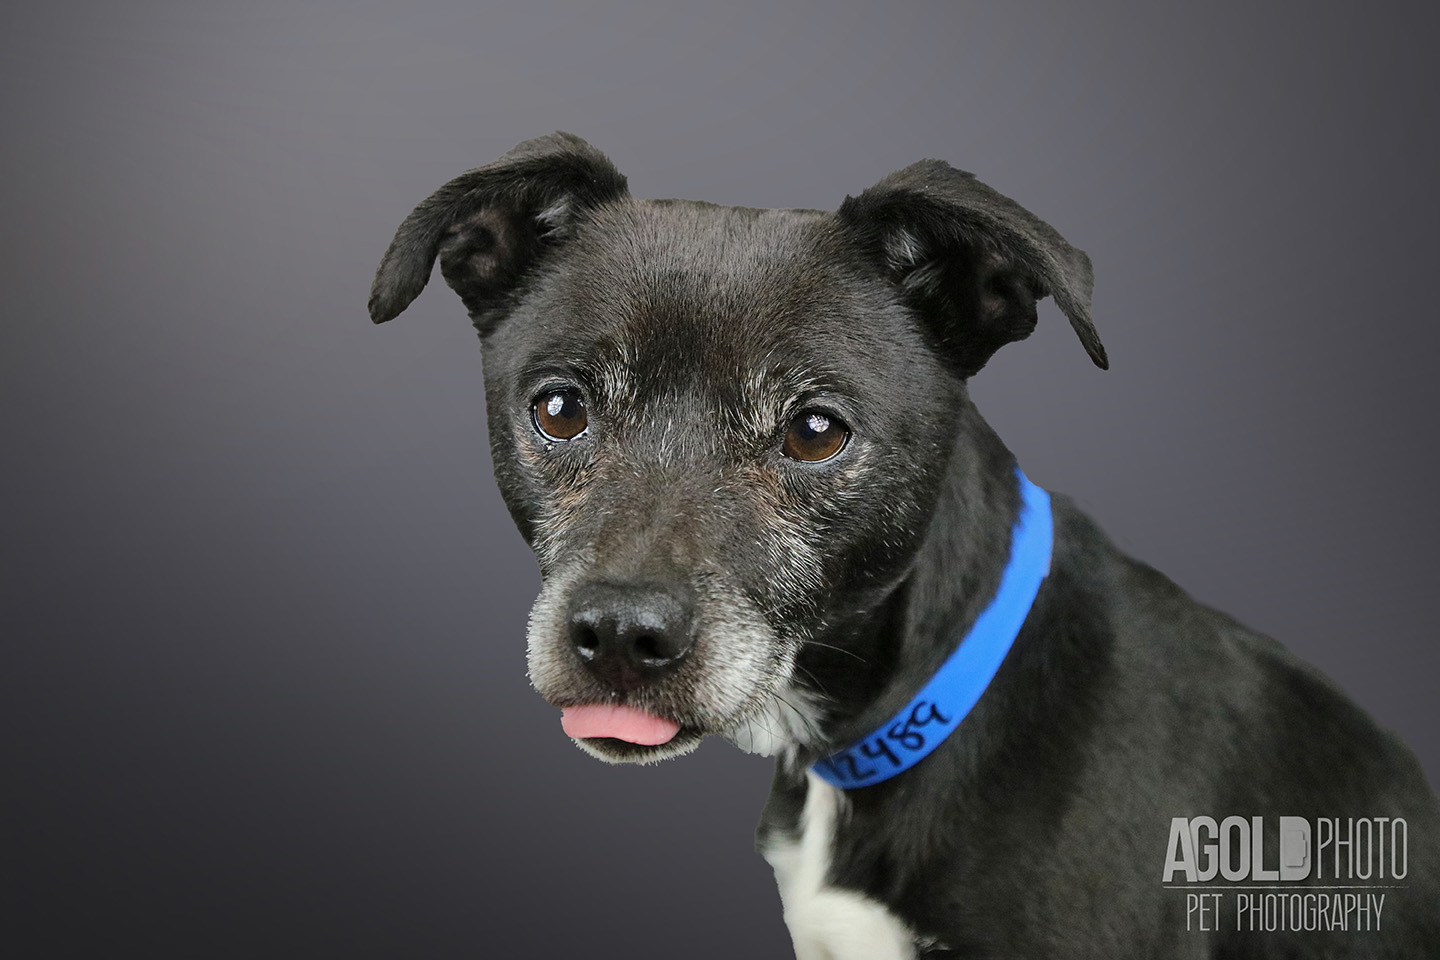 pquito_agoldphoto-tampa-pet-photography__agoldphoto-tampa-pet-photography_